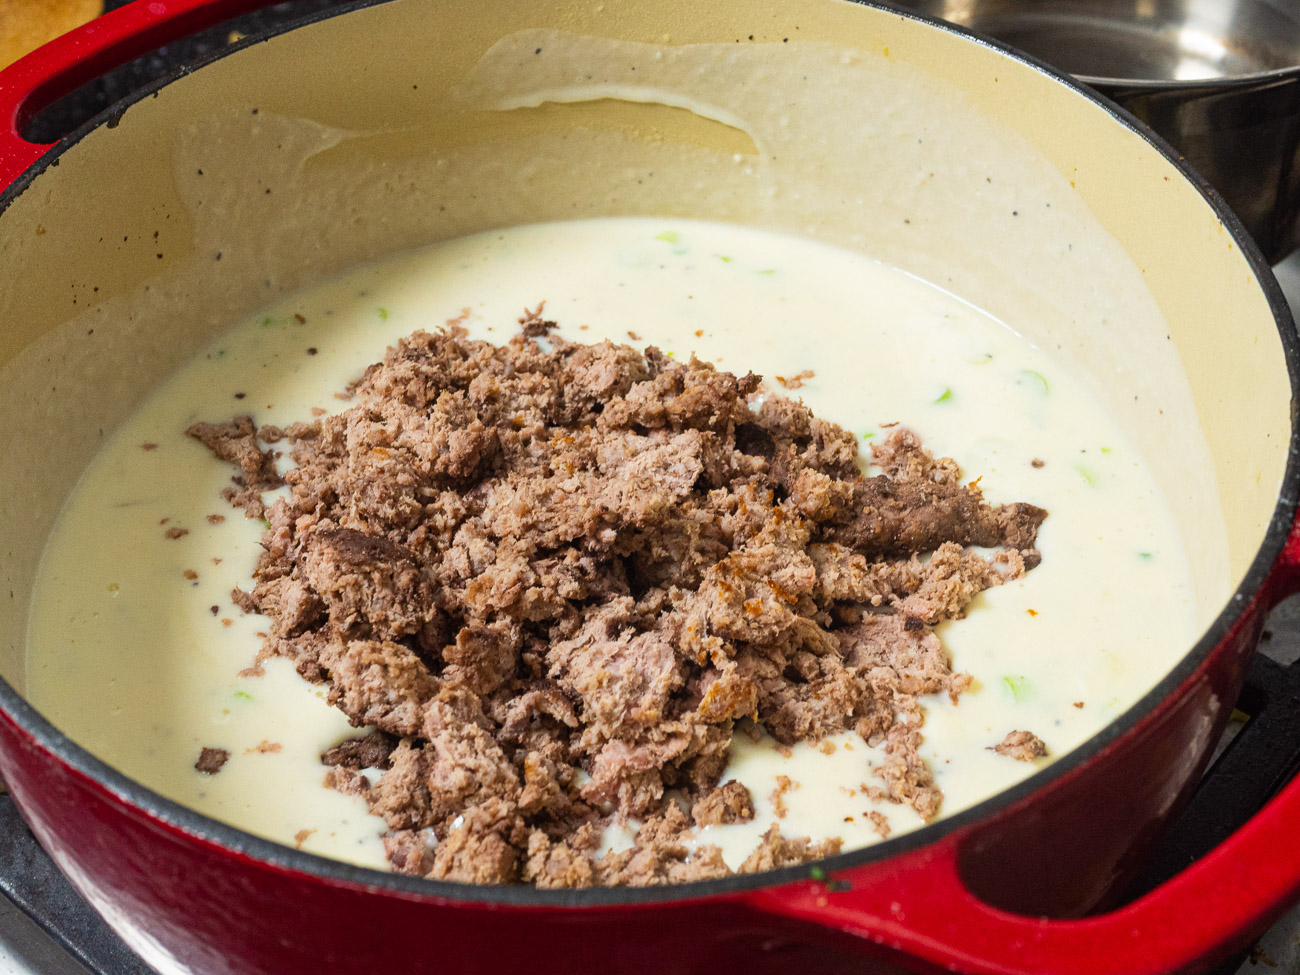 Add in potato, cheese, scallion, yogurt and sour cream and stir. Cook until soup begins to bubble. Add in meatloaf (or cooked ground beef if you don’t have any leftover meatloaf on hand) and cook about 5 minutes to heat the meatloaf crumbles.